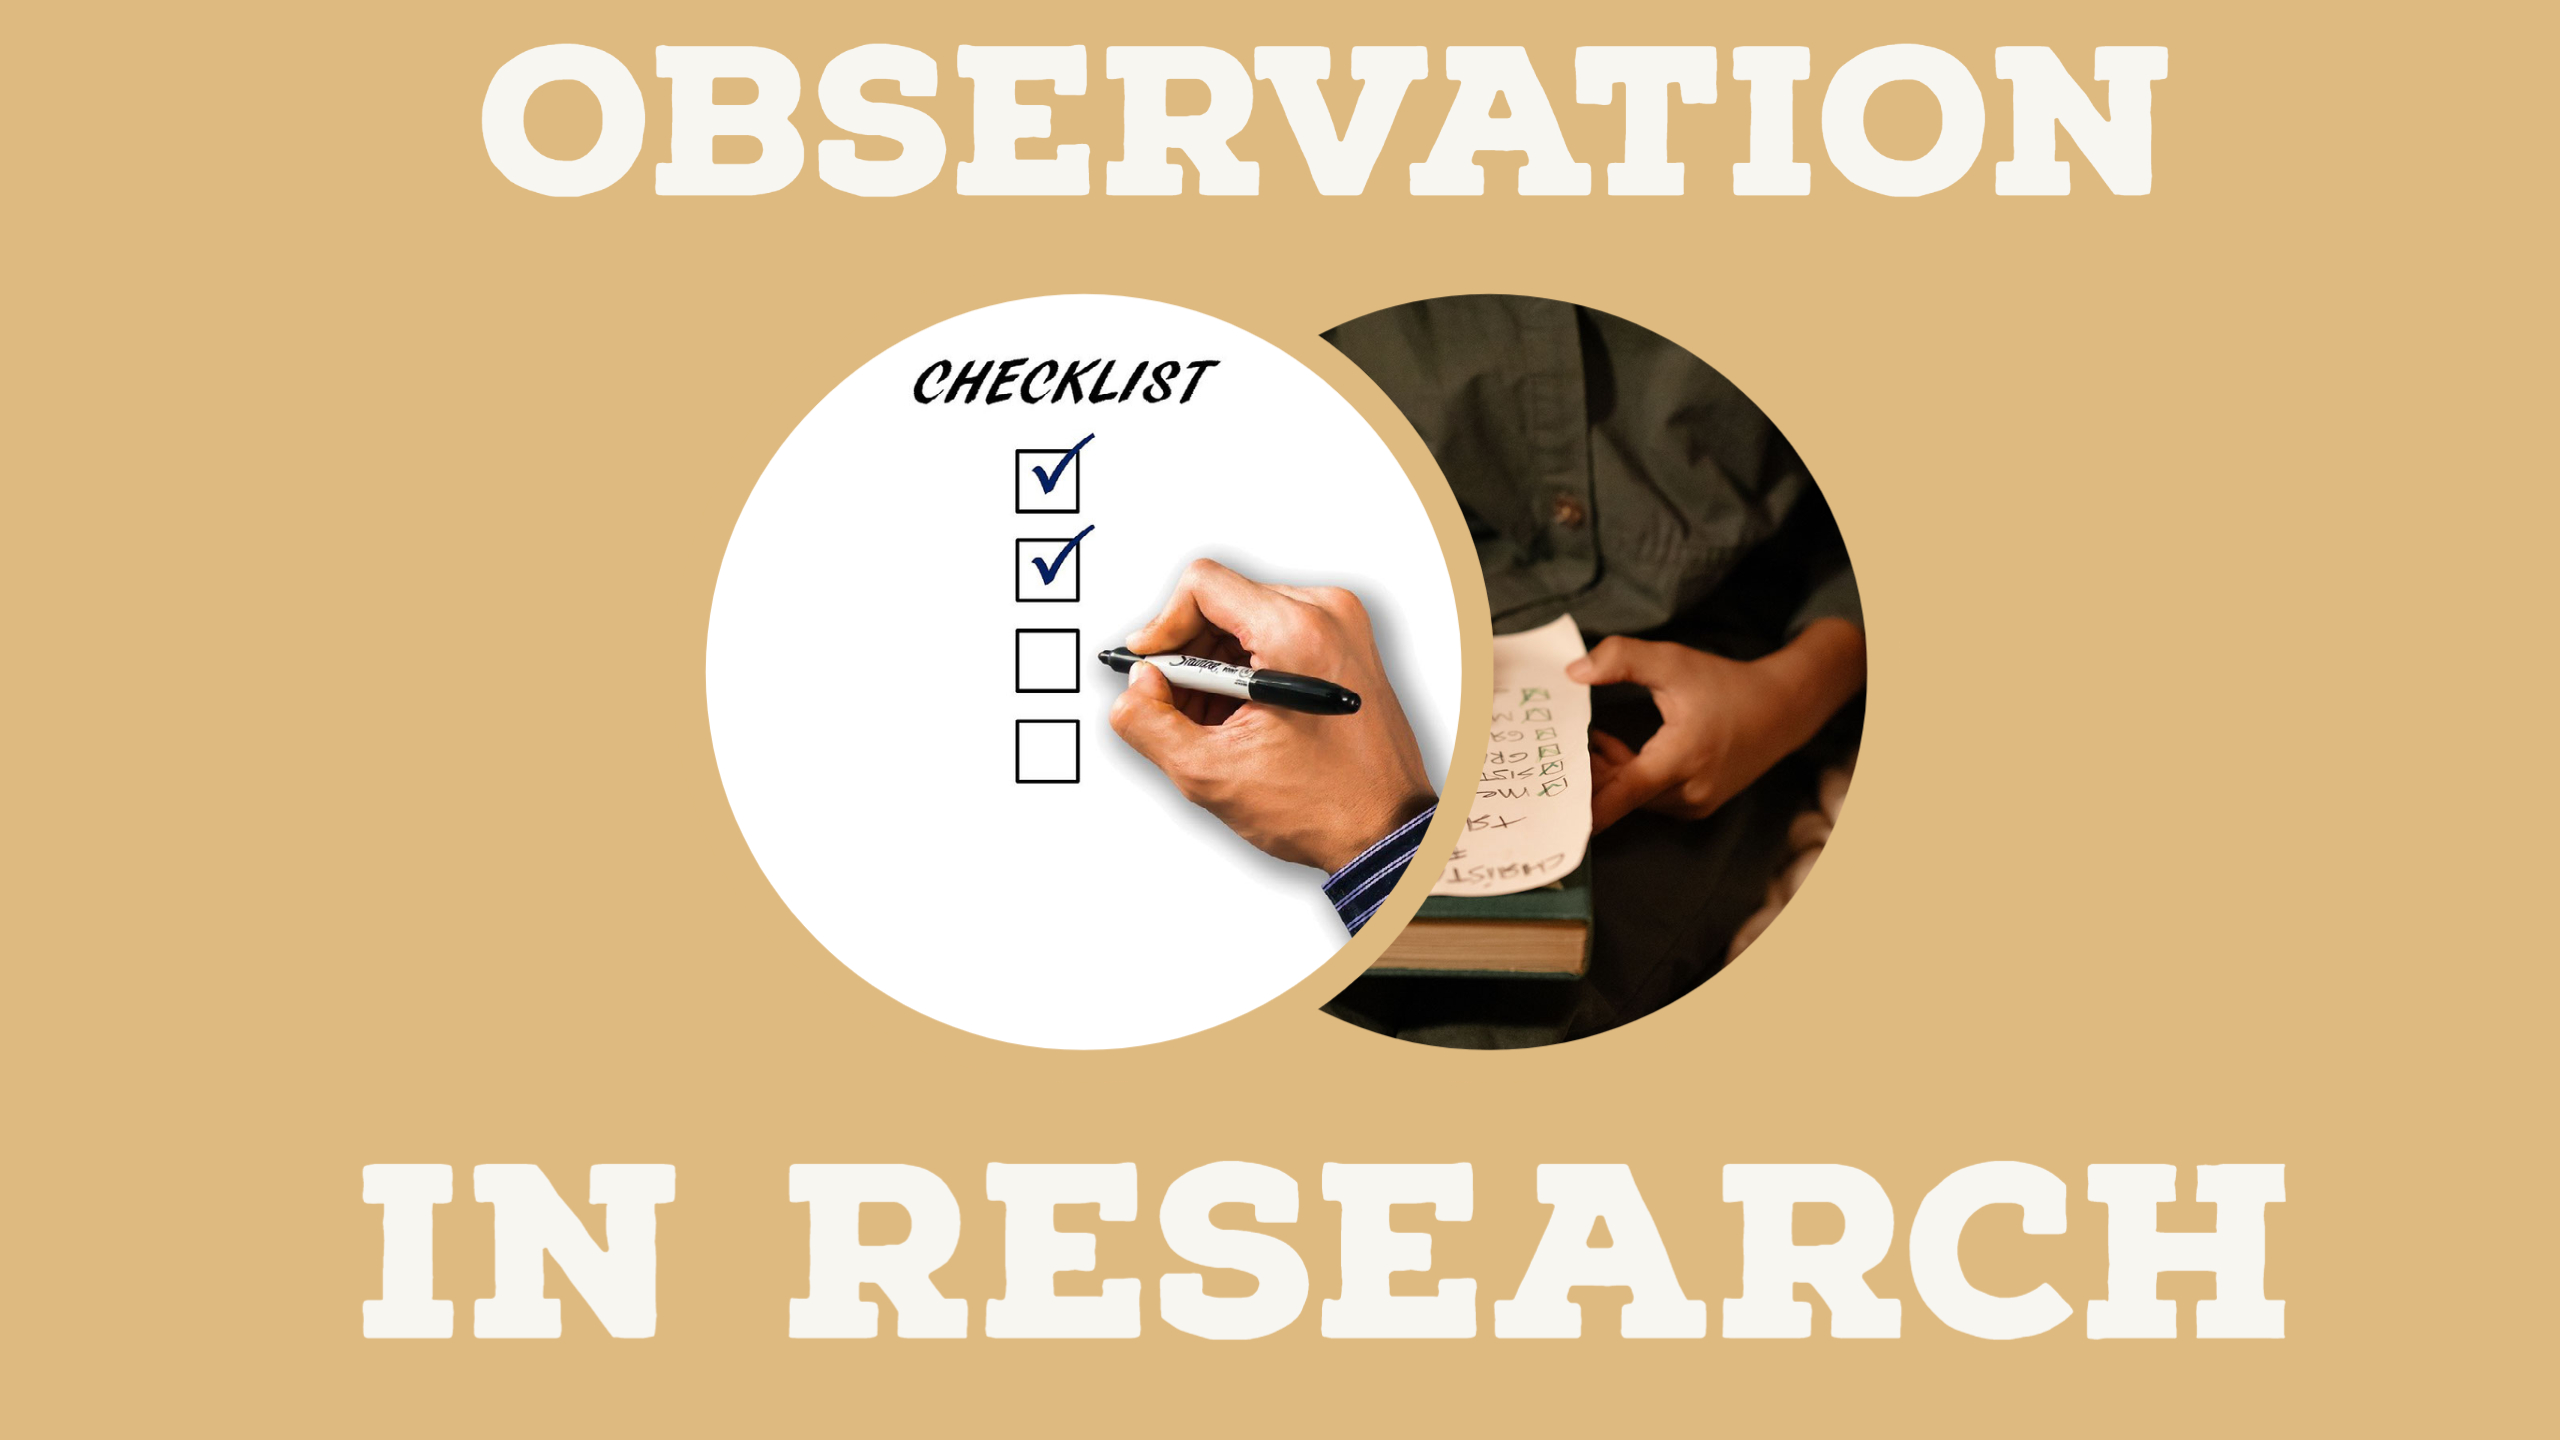 qualitative research using observation